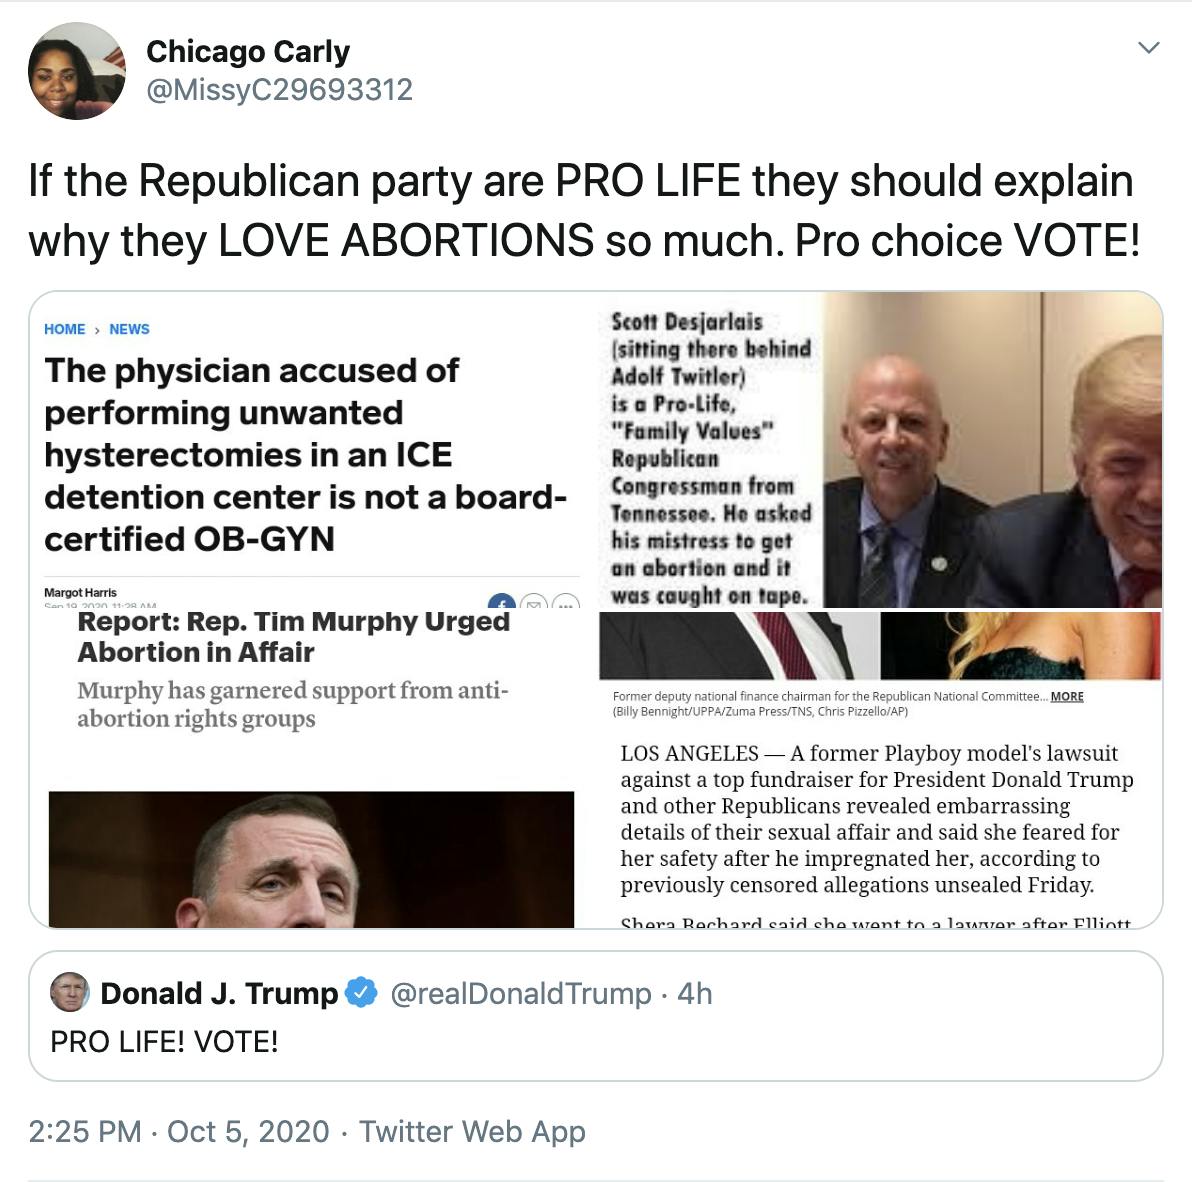 "If the Republican party are PRO LIFE they should explain why they LOVE ABORTIONS so much. Pro choice VOTE!" screen caps of numerous articles about Republican men paying for abortions and the hysterectomies committed in ICE facilities